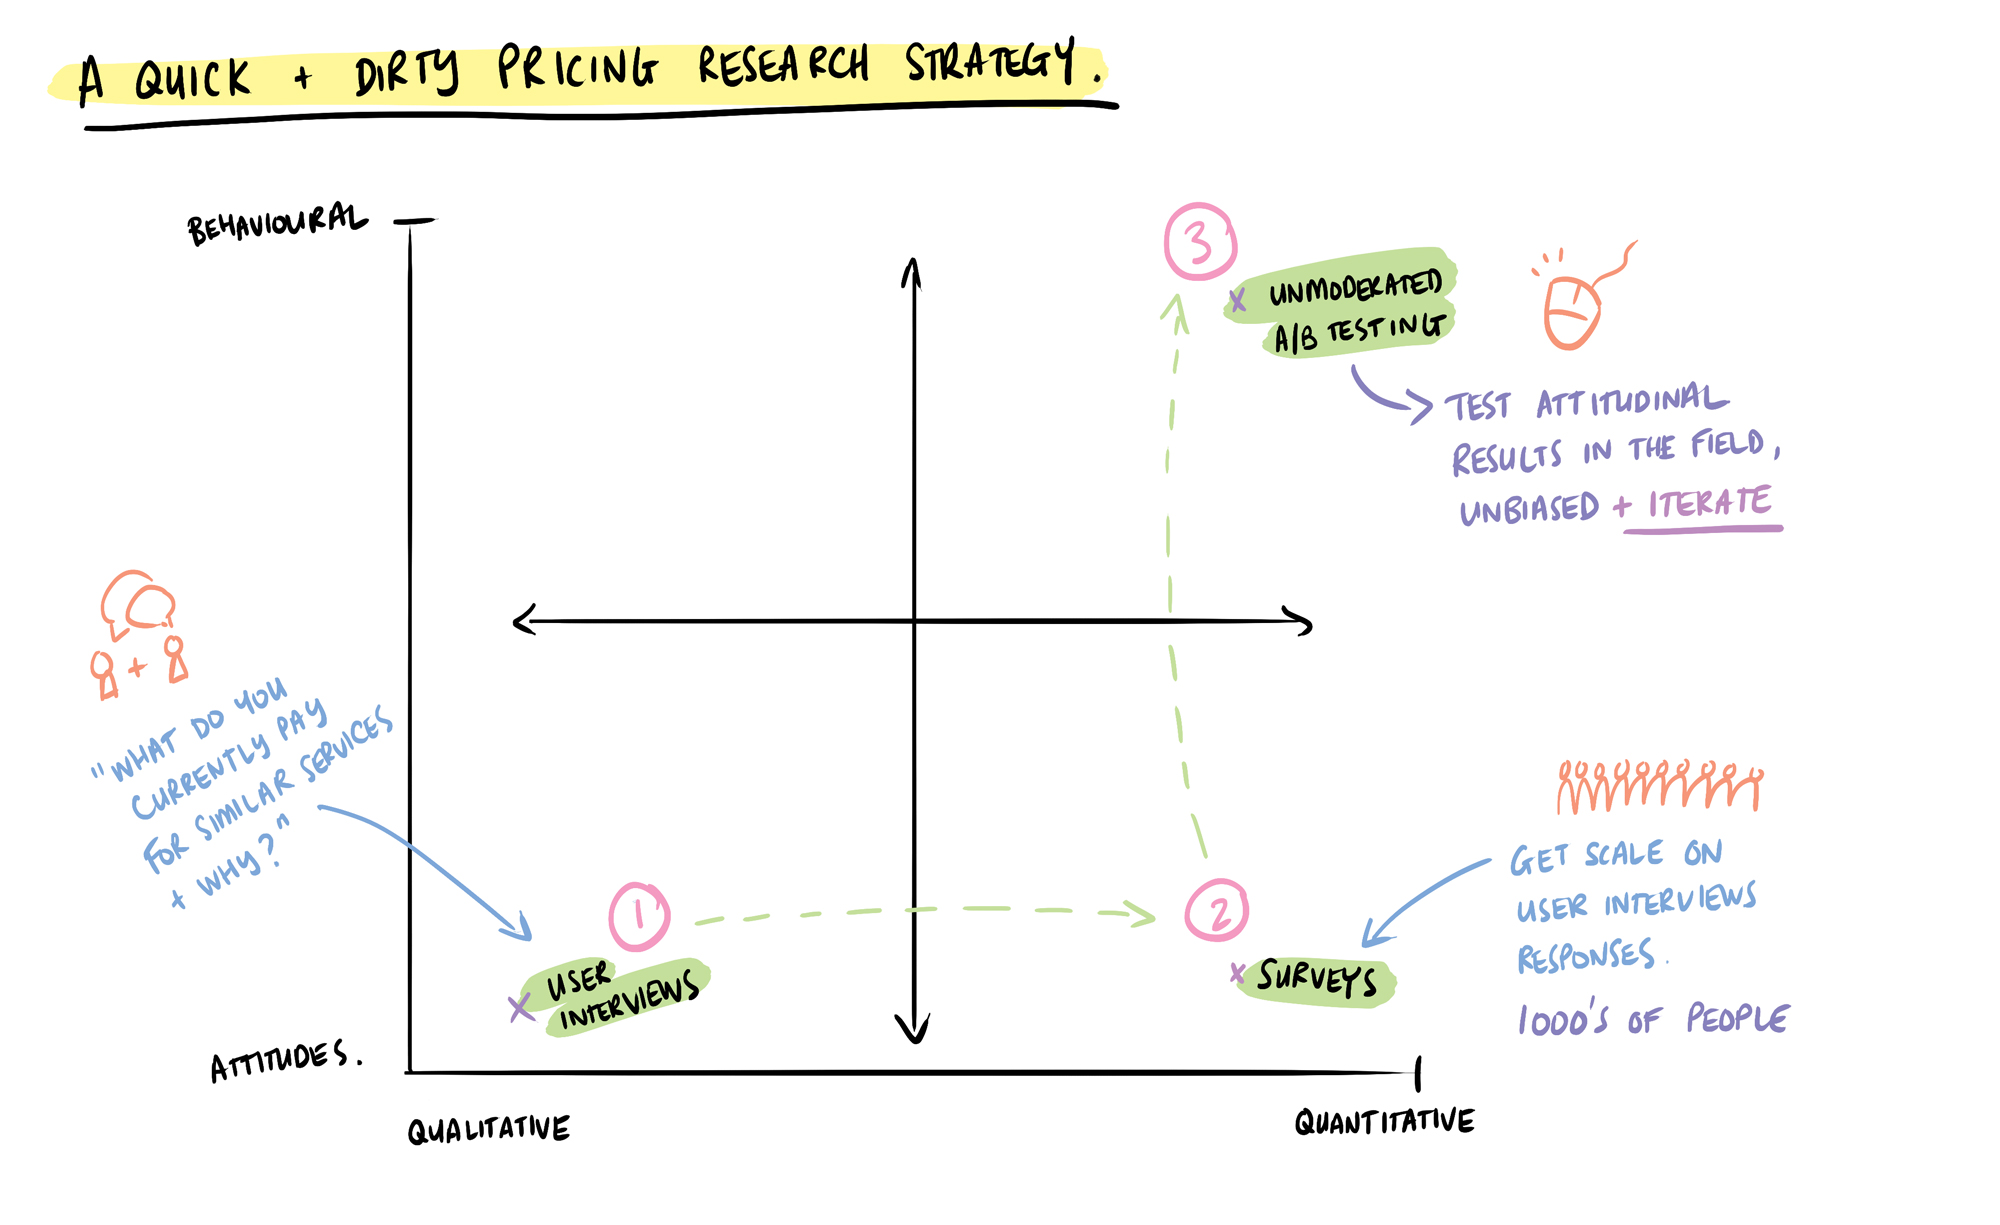 A graph showing research methods to do a basic pricing strategy